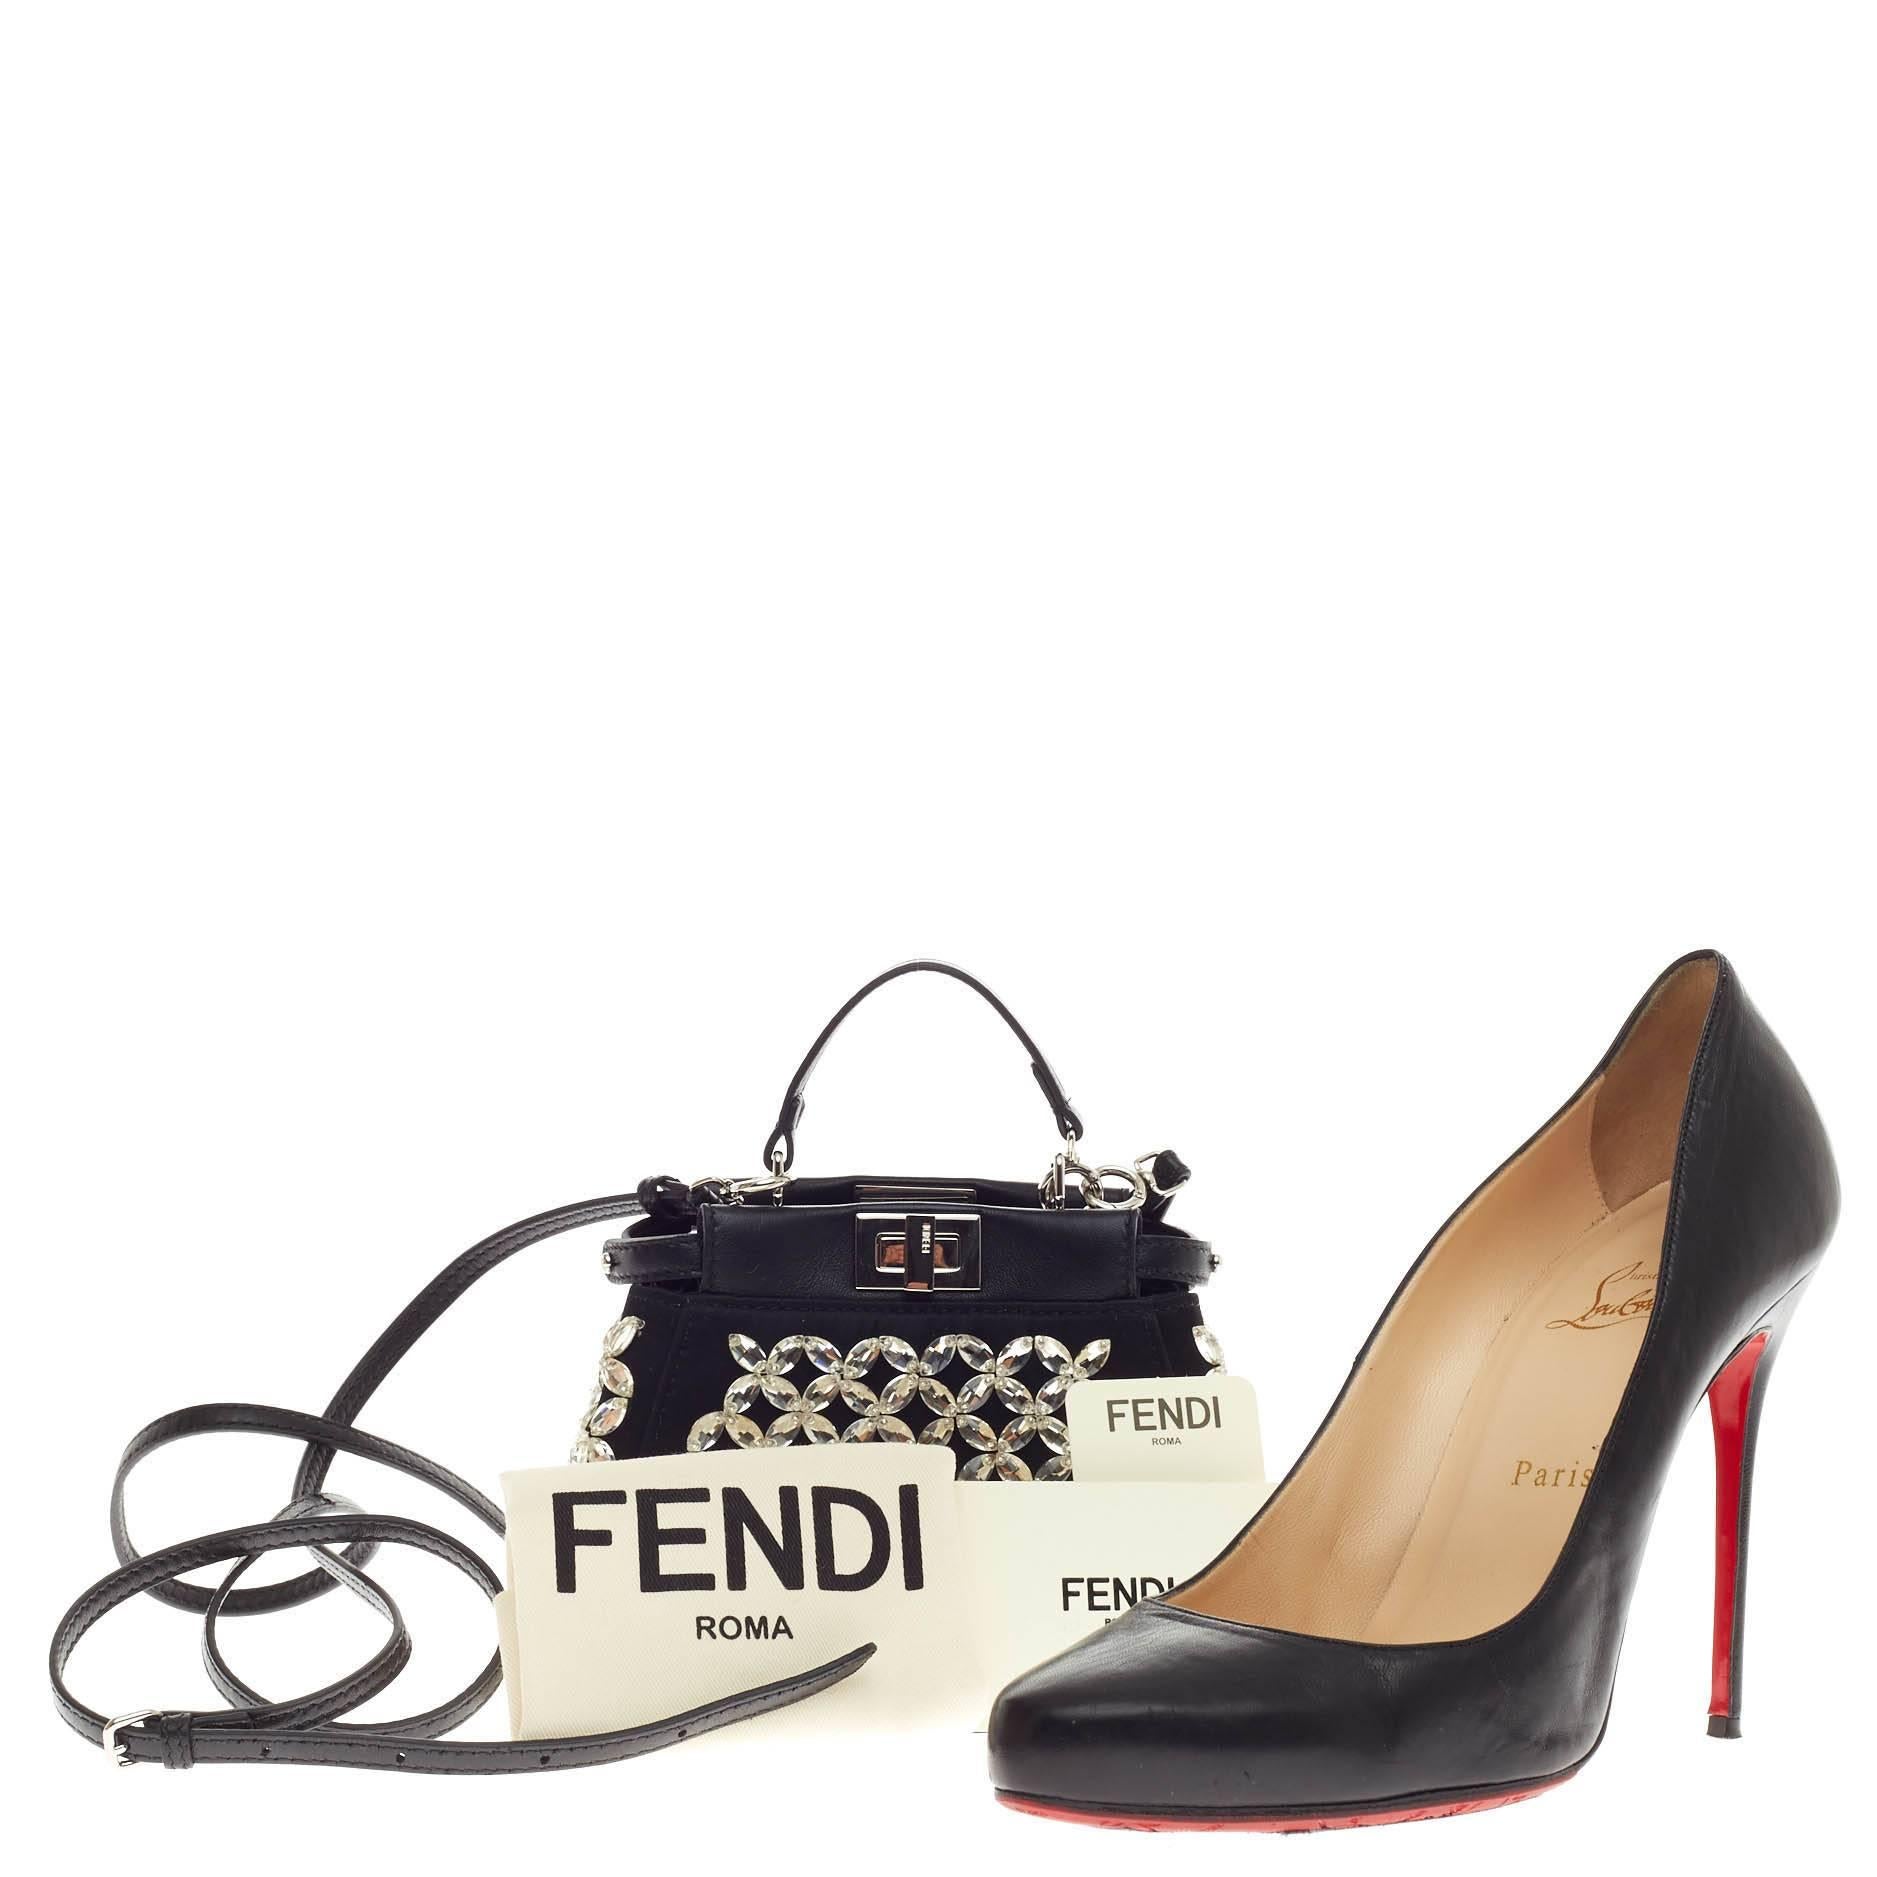 This authentic Fendi Peekaboo Crystal Embellished Satin Micro presented in the brand's 2015 Collection is Fendi's most sought-after design. Crafted from black leather adorned silver crystal embellishment, this micro-size satchel is accented with a